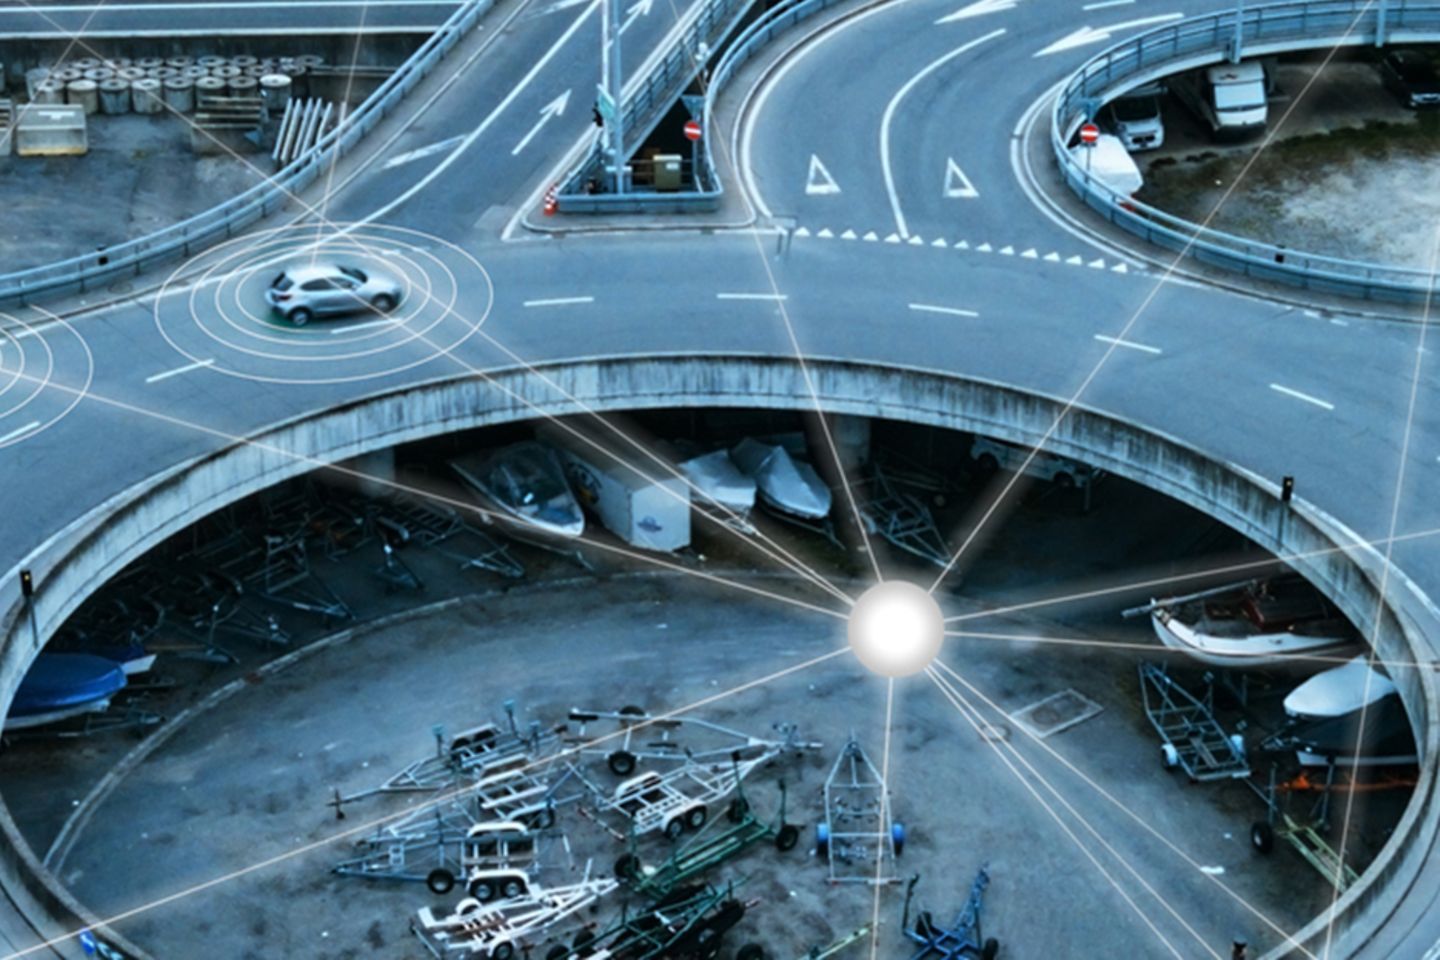 Roundabout from above, in which many cars drive that are connected via digital networks.